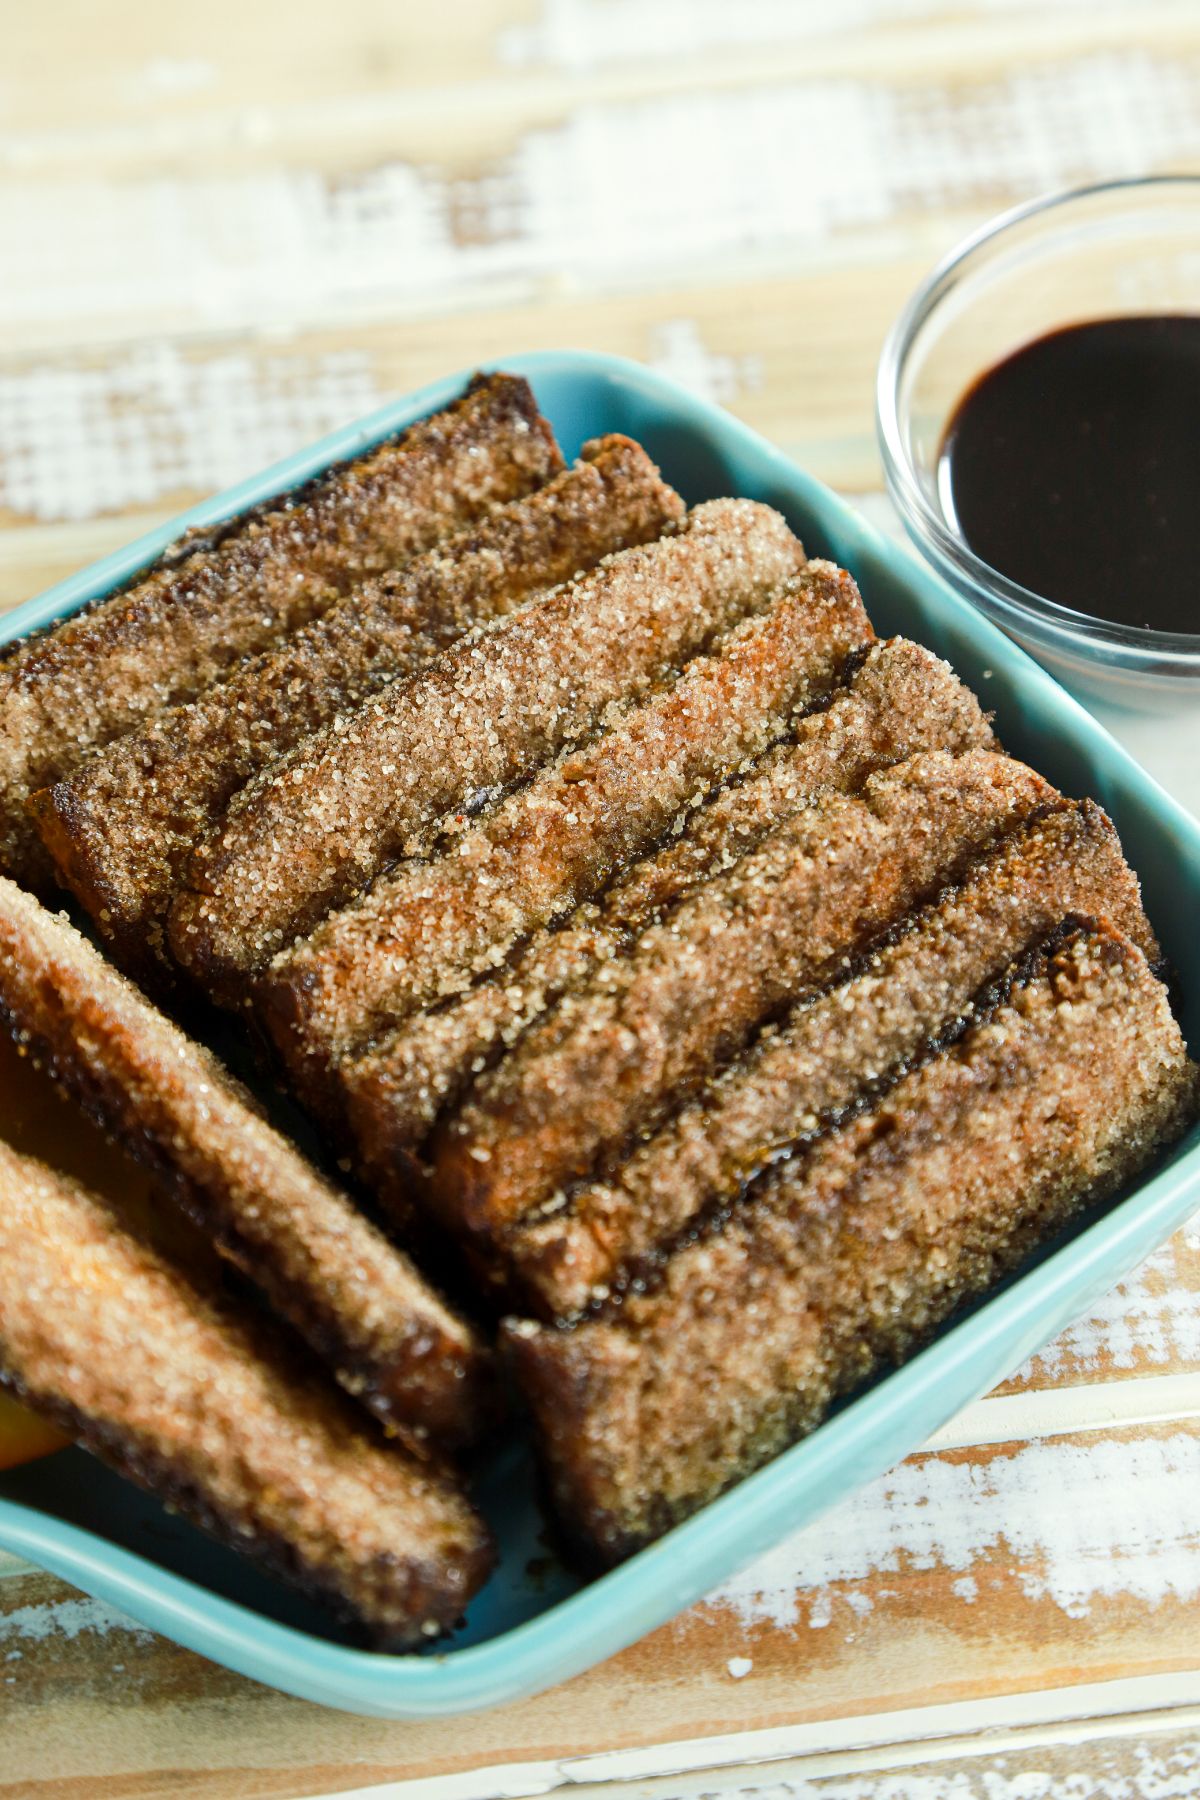 cinnamon breadsticks stacked together in teal bowl by glass bowl of chocolate sauce